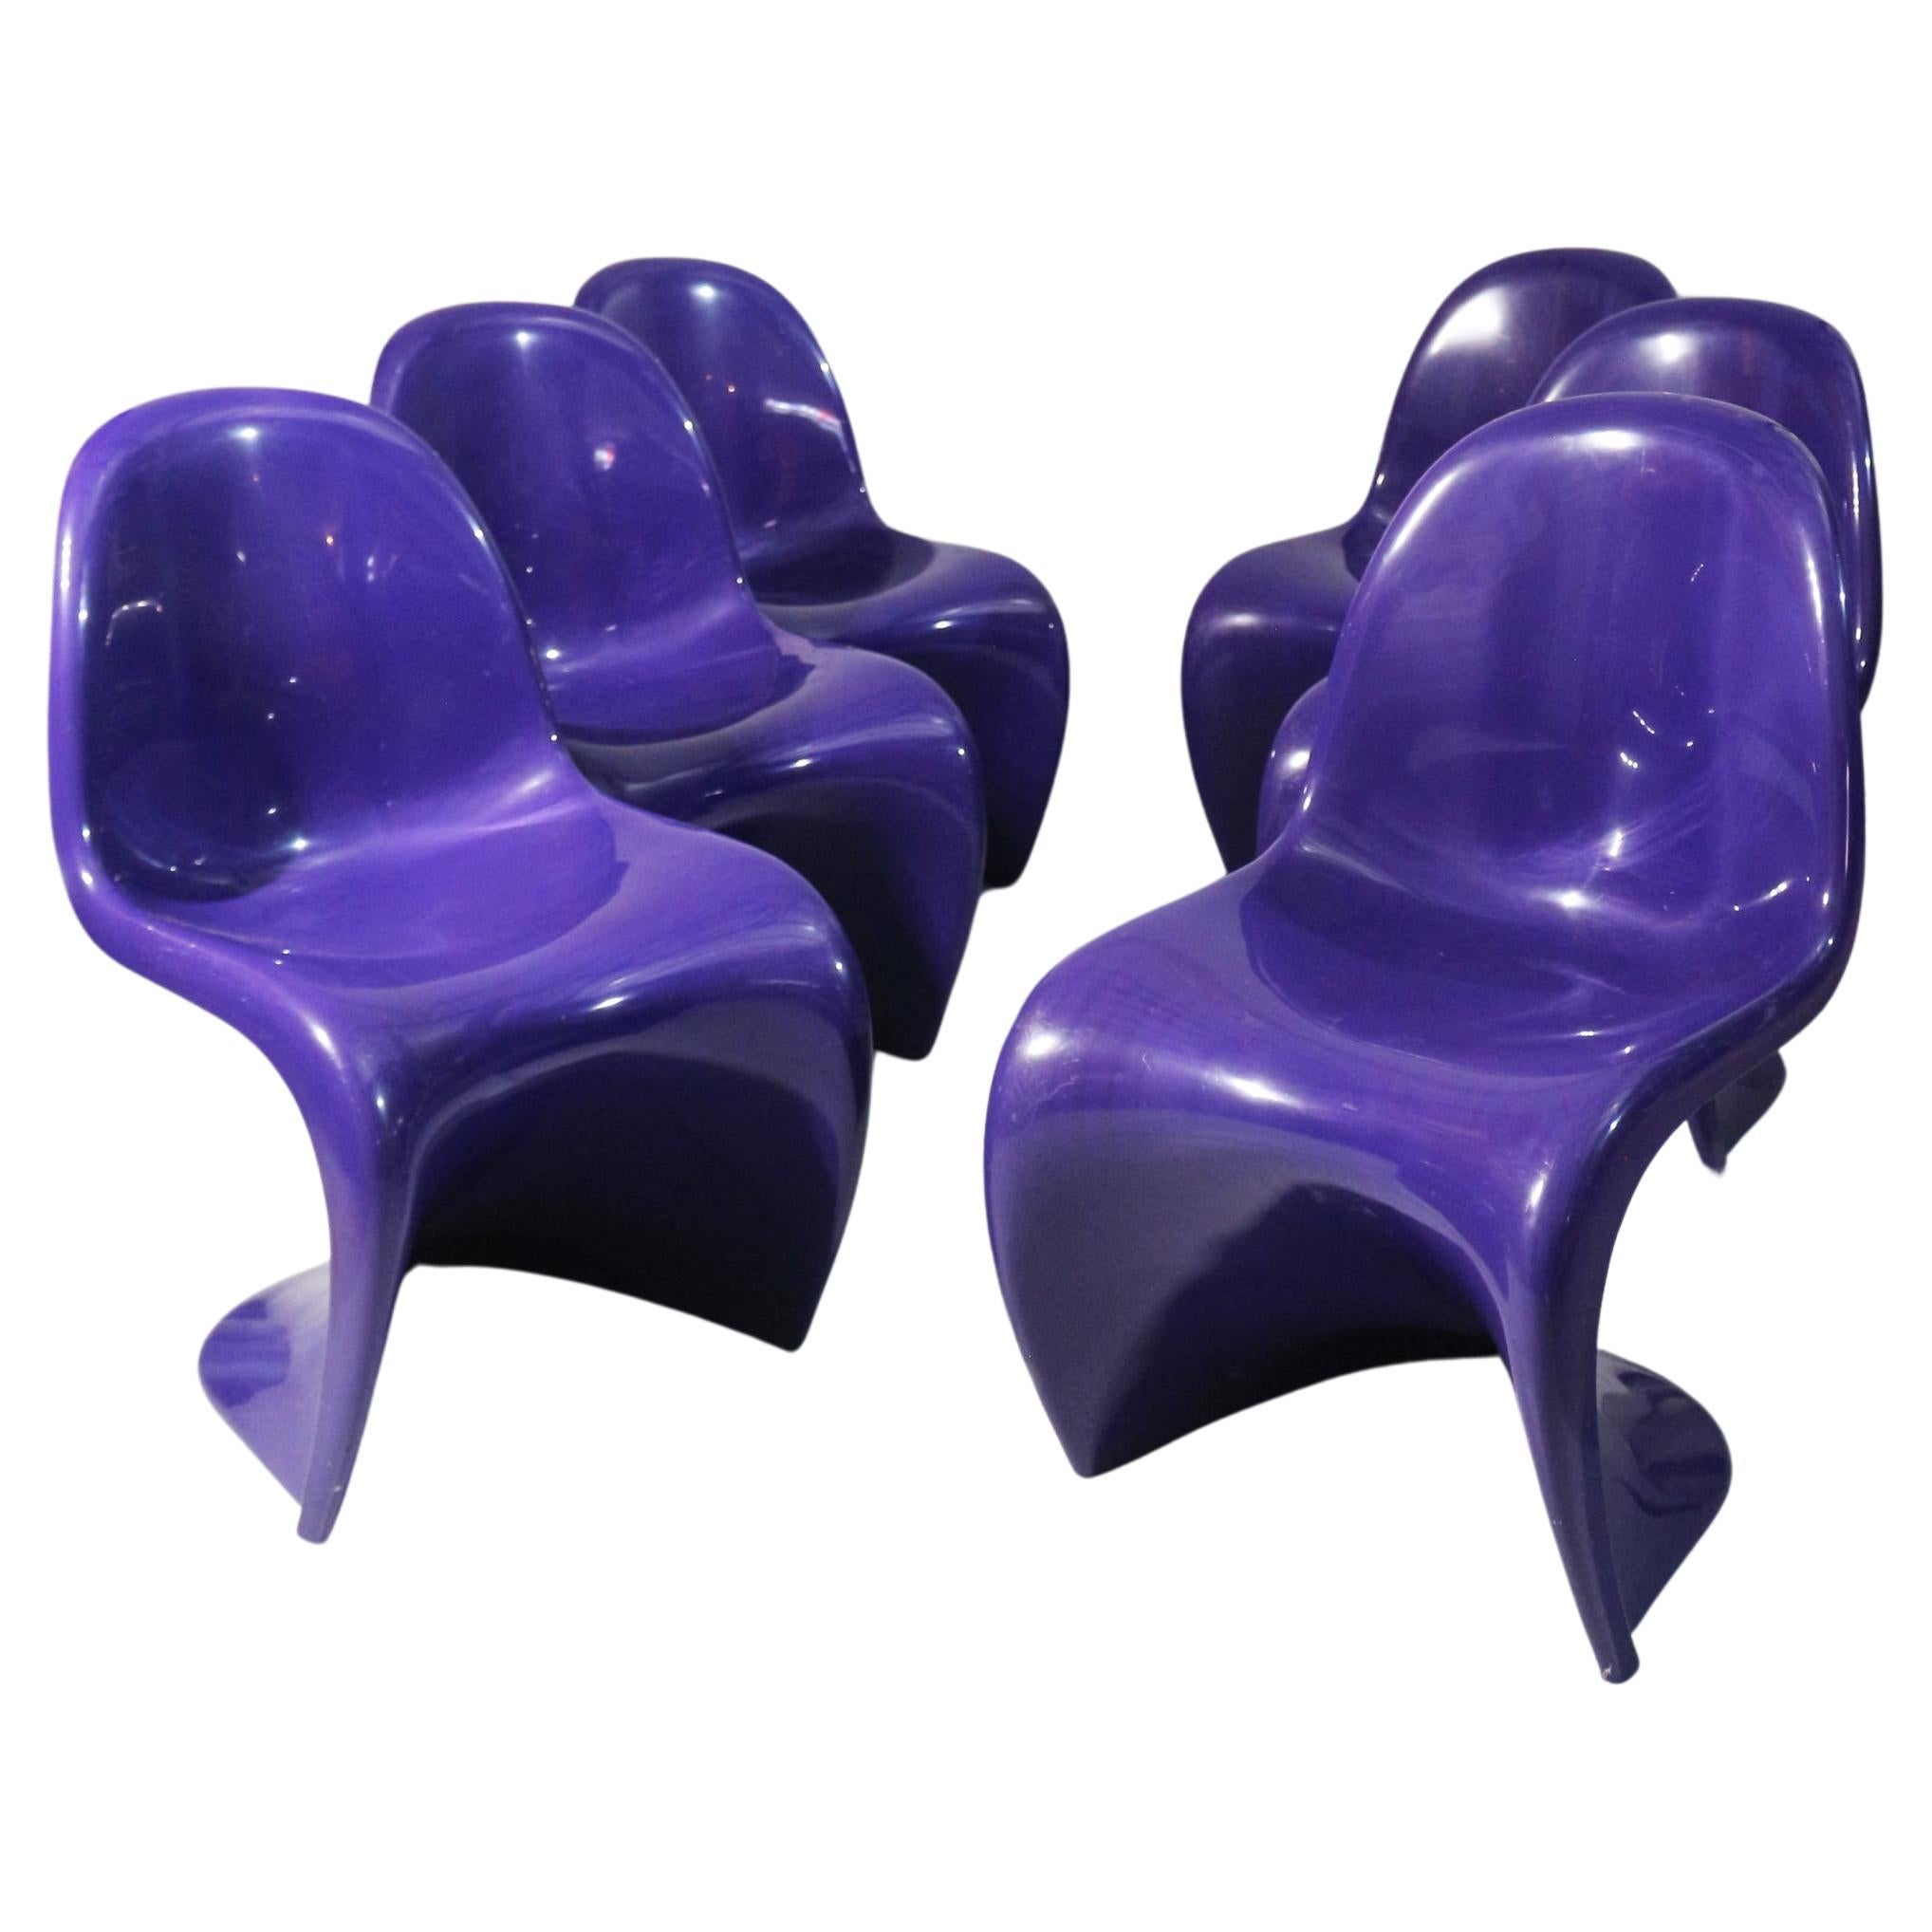 Set 6 chairs Verner Panton from 1970